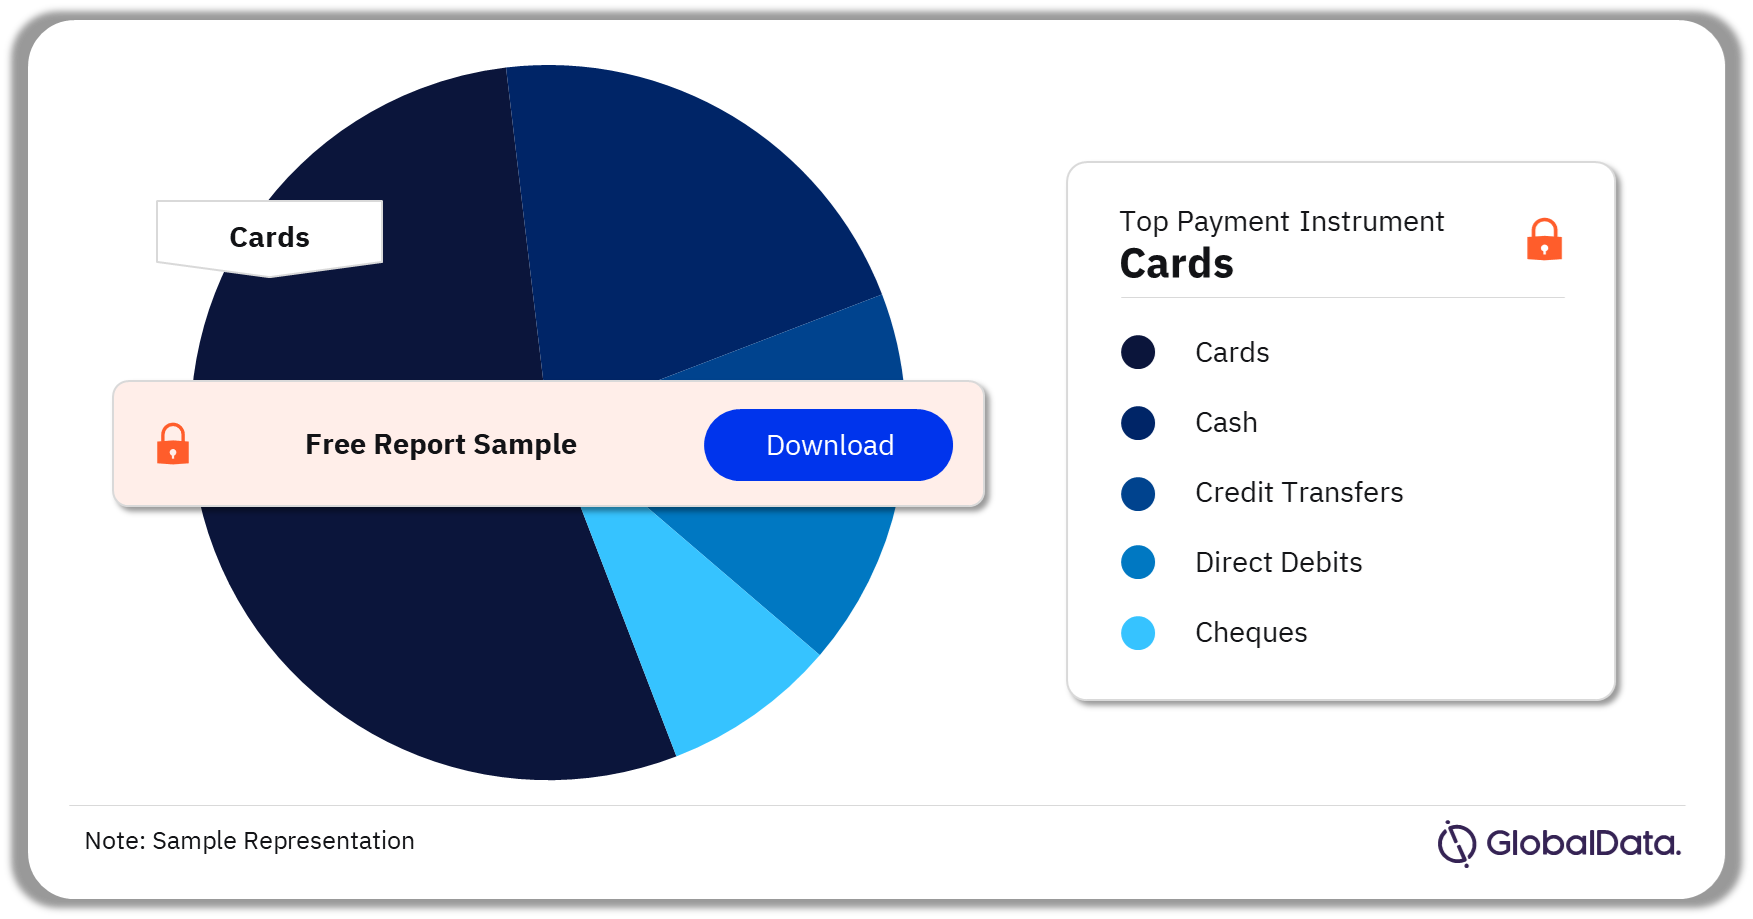 Australia Cards and Payments Market Analysis by Payment Instruments, 2023 (%)